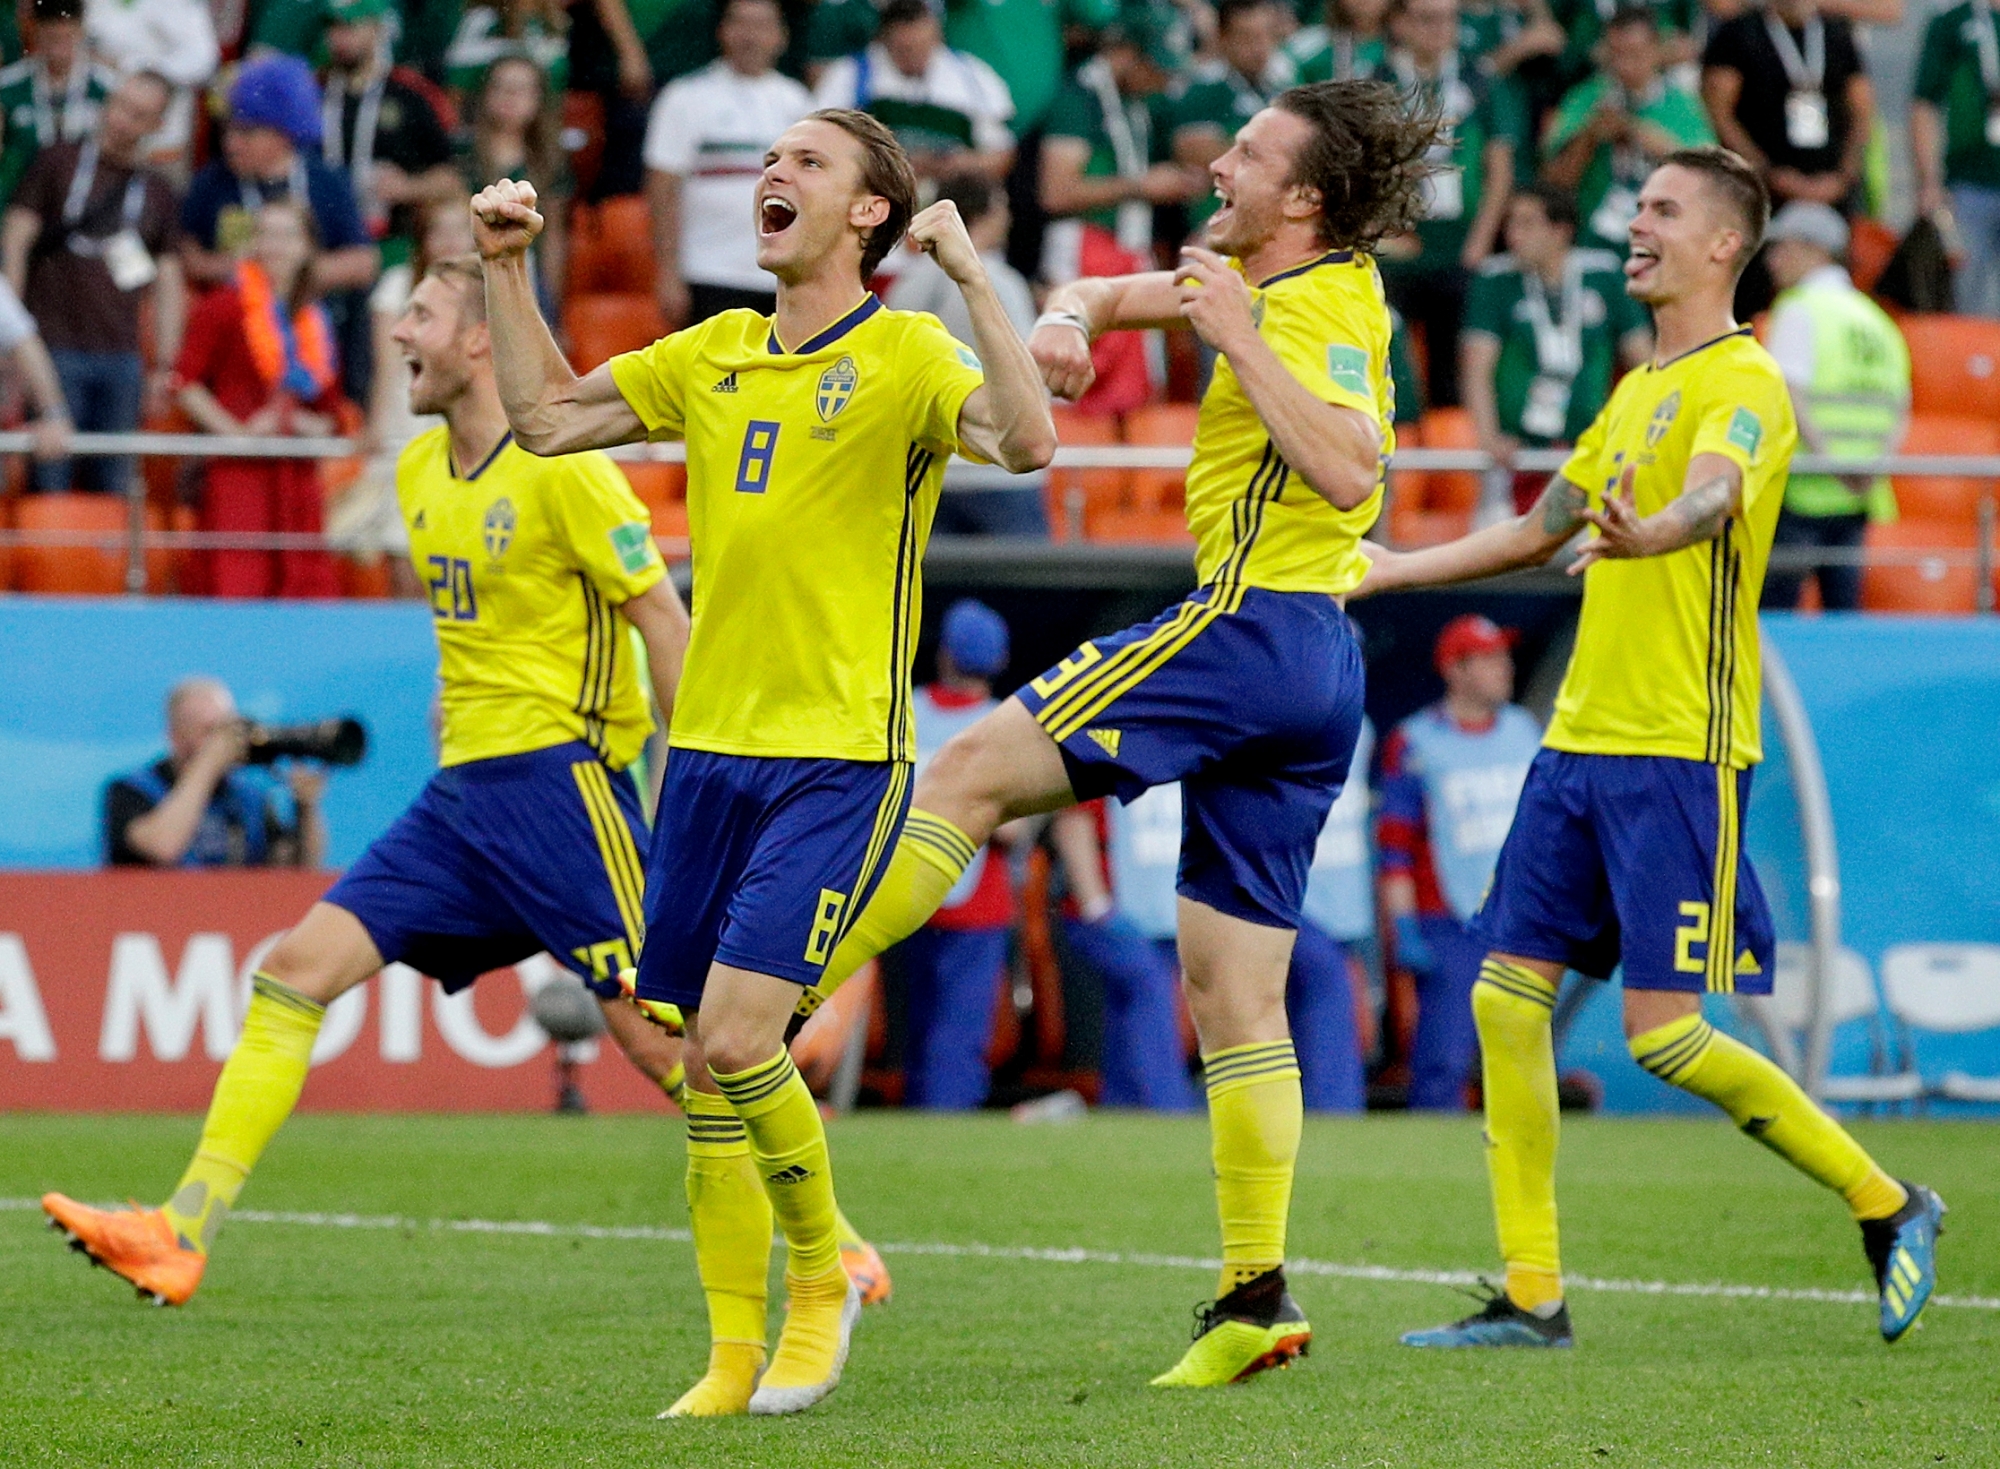 Sweden's Albin Ekdal, front, and his teammates celebrate after the group F match between Mexico and Sweden, at the 2018 soccer World Cup in the Yekaterinburg Arena in Yekaterinburg , Russia, Wednesday, June 27, 2018. (AP Photo/Gregorio Borgia)5 RUSSIA SOCCER WCUP MEXICO SWEDEN